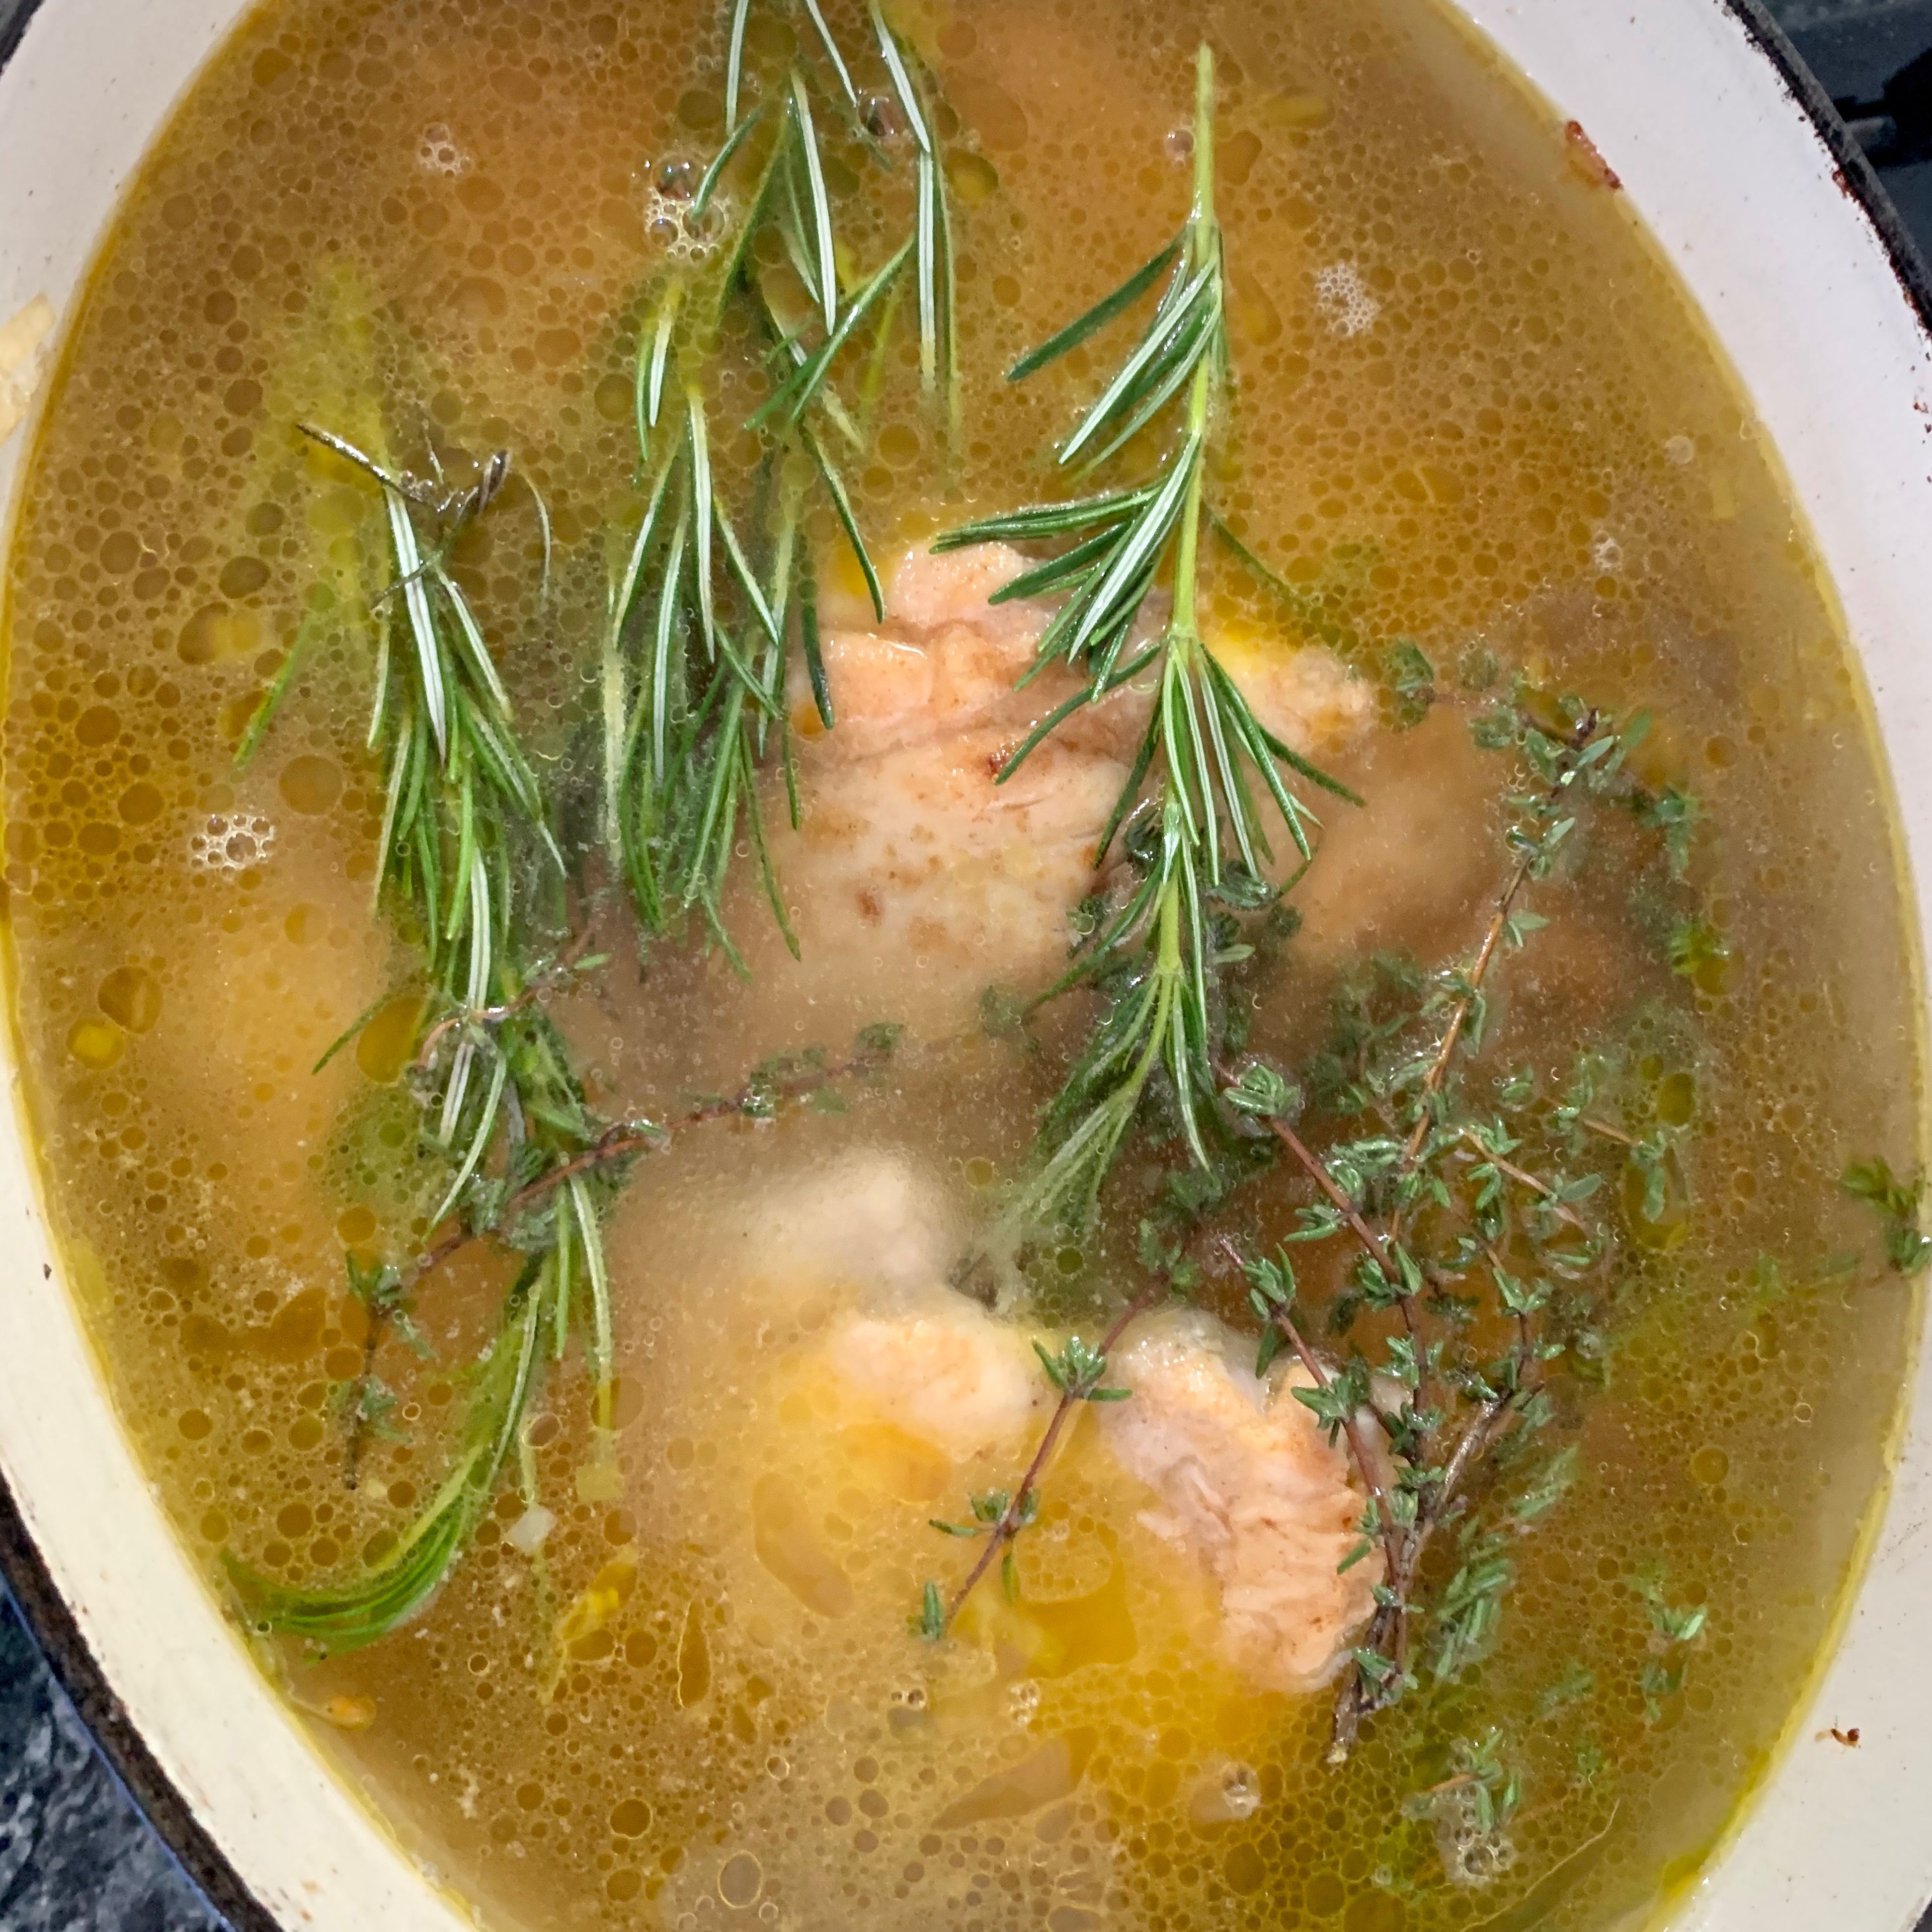 Pour in 1 litre of chicken stock and 1 litre of water with your rosemary and thyme including 3 bay leaves, simmer on a low heat for around 45 mins then remove your chicken and shred it then add it back into the stock. Once this has been done your ready to enjoy your fresh chicken soup! Enjoy ❤️